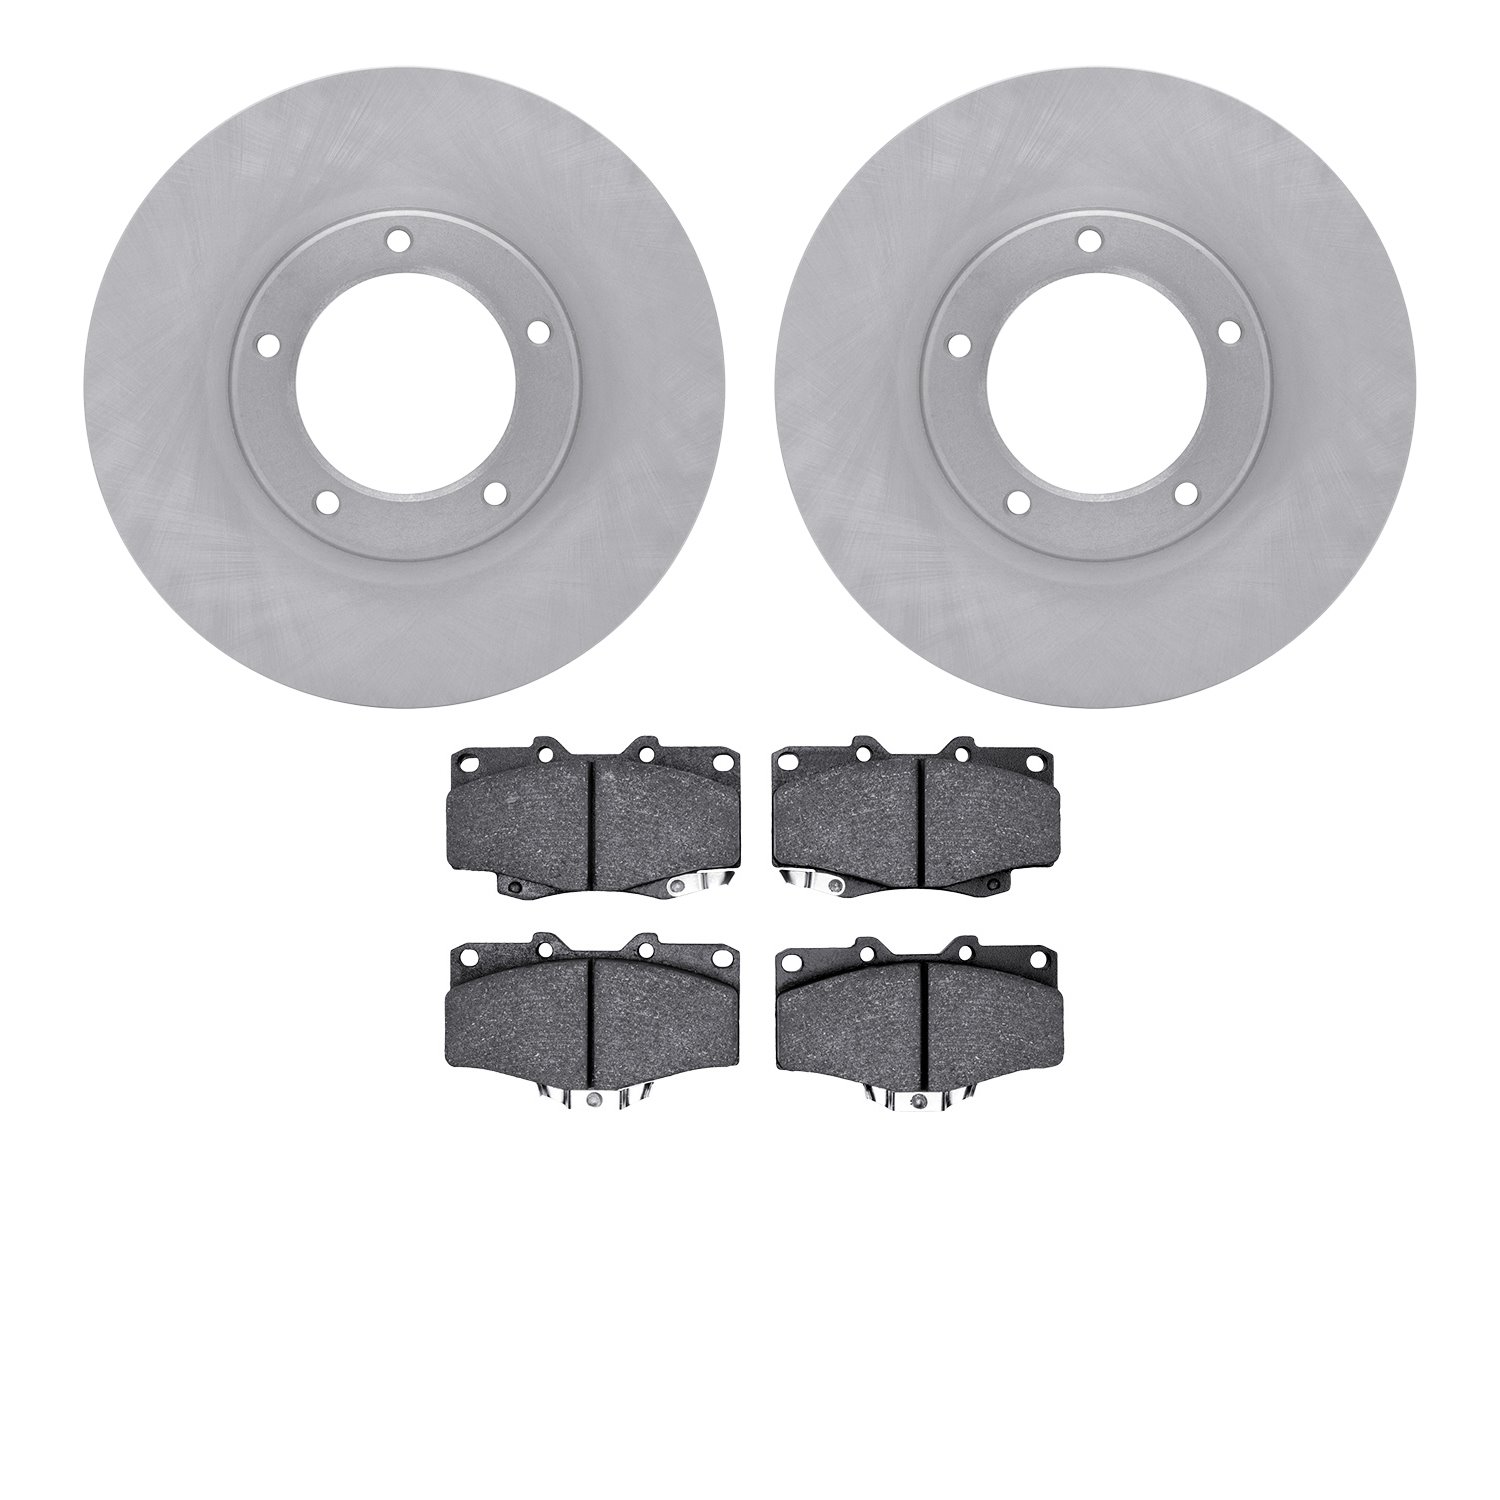 6402-76022 Brake Rotors with Ultimate-Duty Brake Pads, 2004-2008 Lexus/Toyota/Scion, Position: Front